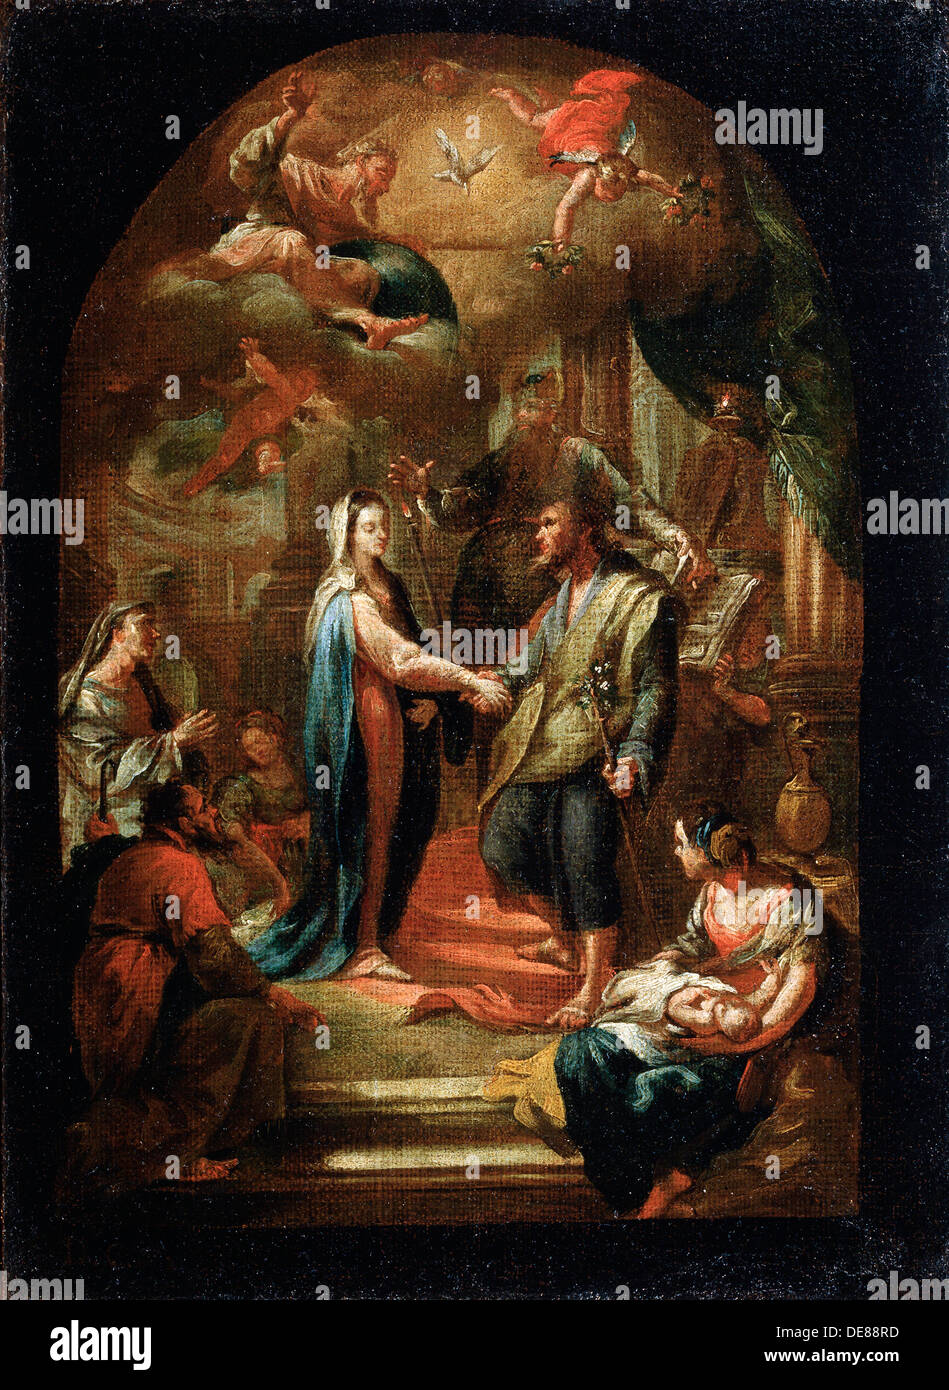 'The Marriage of Mary and Joseph', 18th or early 19th century. Artist: Domenico Corvi Stock Photo